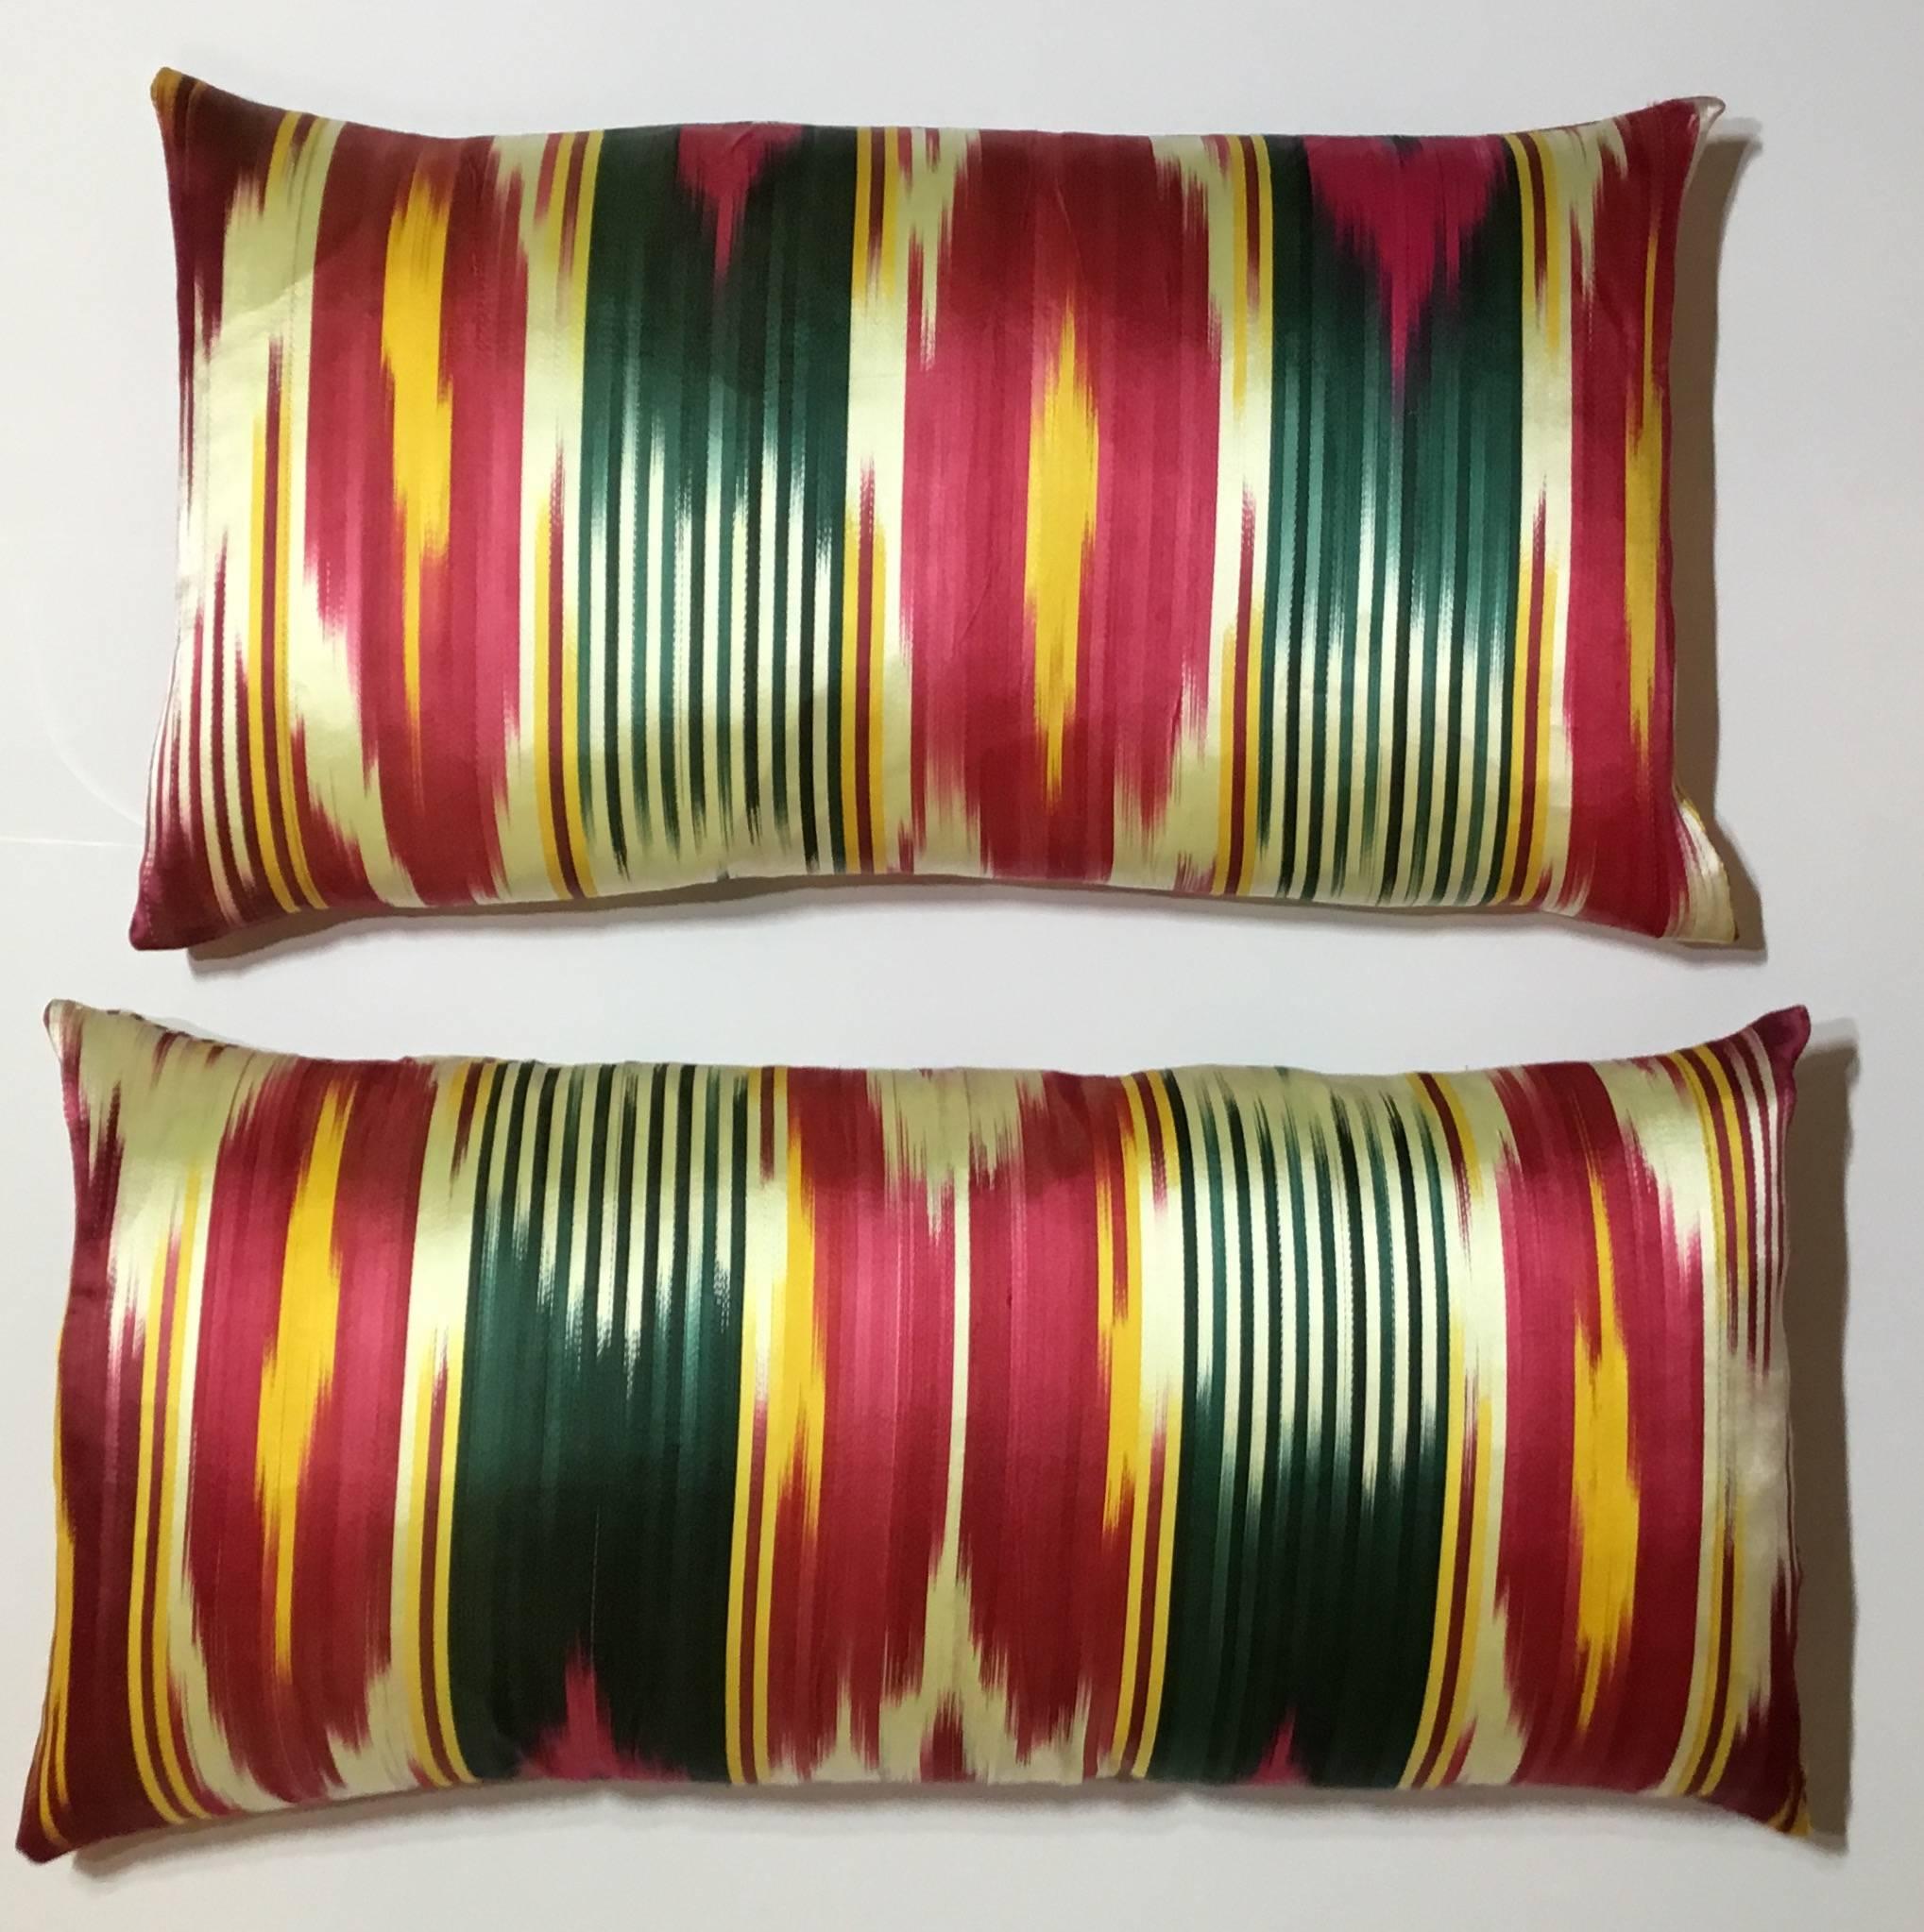 Beautiful pair of pillows made of original old silk Ikat from Uzbekistan, Ikat on both sides, soft silk with down and feather fresh inserts.
Sizes: 23" x 11". 20" x 11".